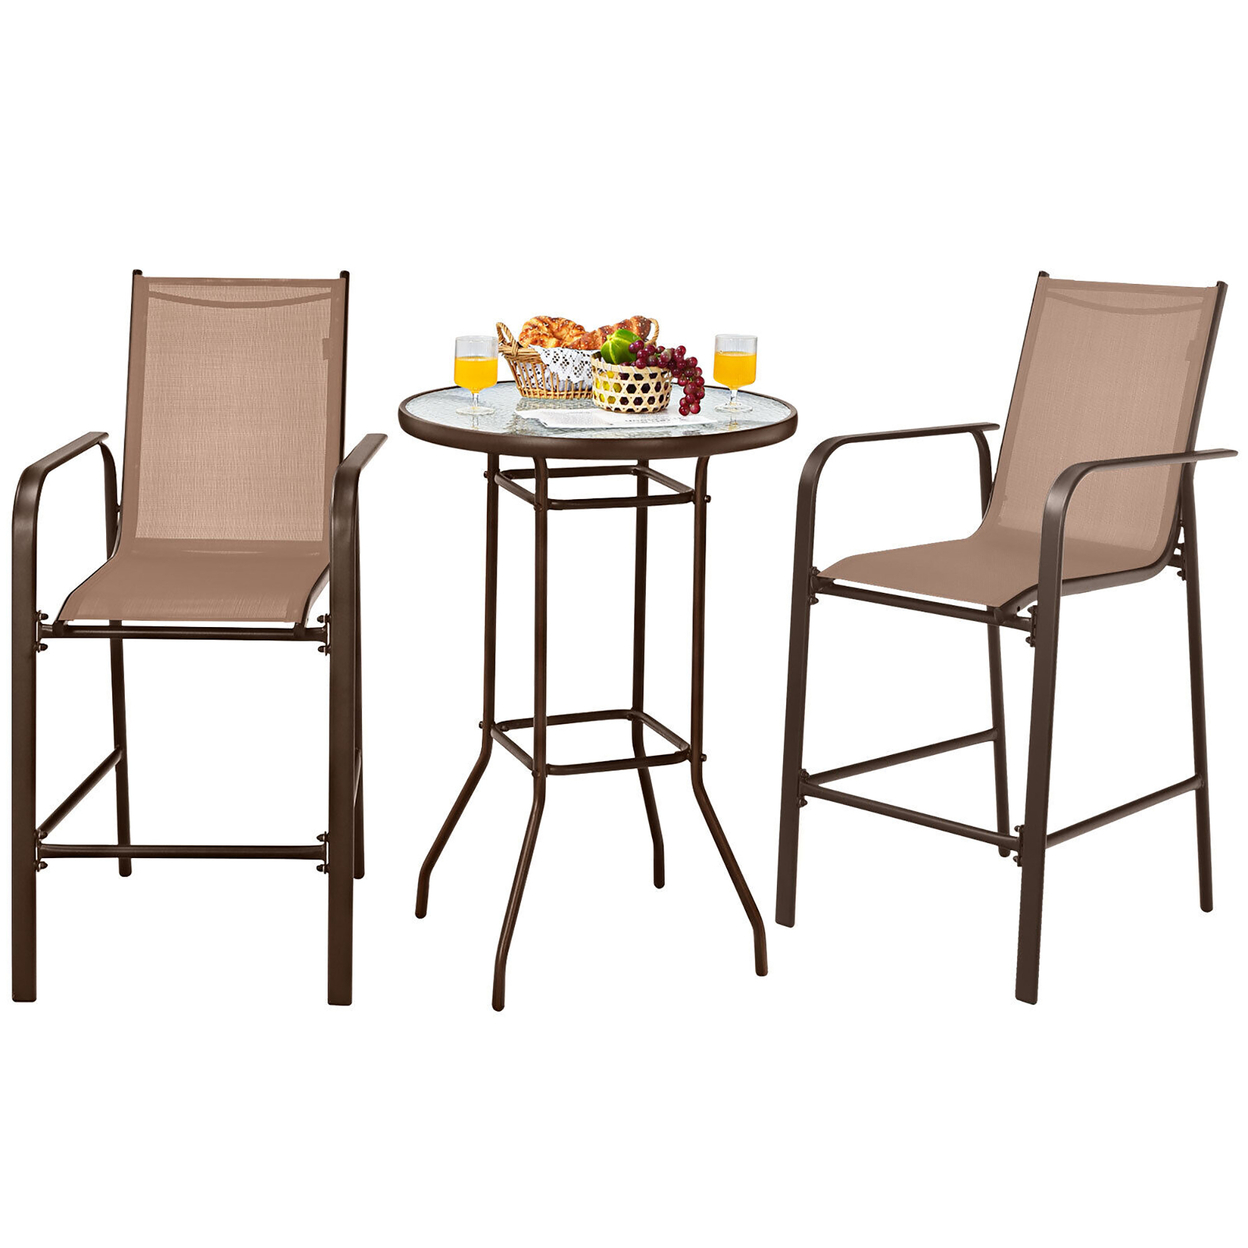 3PCS Patio Bar Set Outdoor Bistro Set W/ 2 Stools & 1 Tempered Glass Table Brown